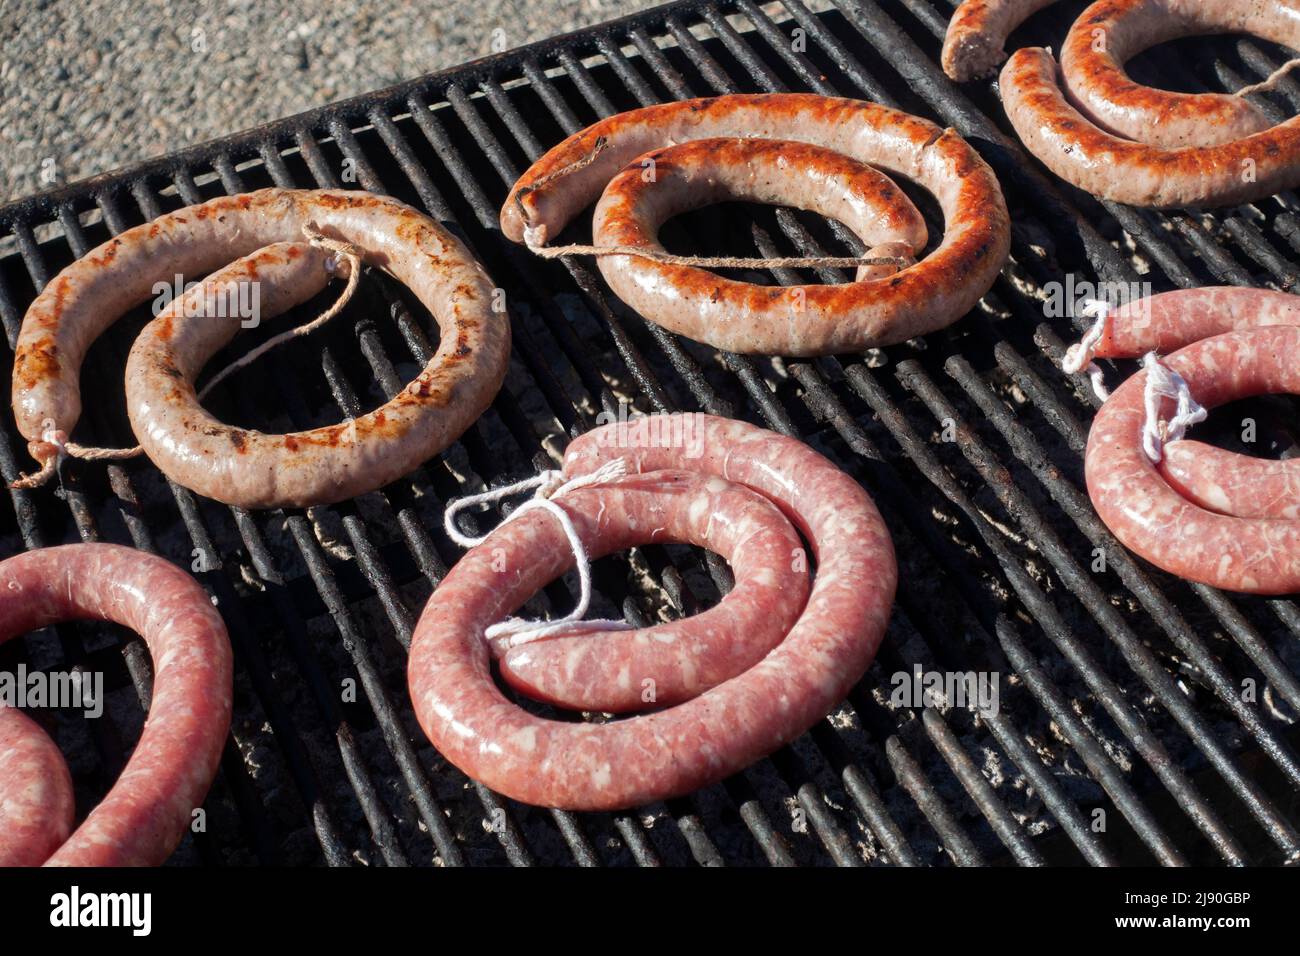 Grilling traditional sausages.Tremp festival.Catalonia.Spain Stock Photo